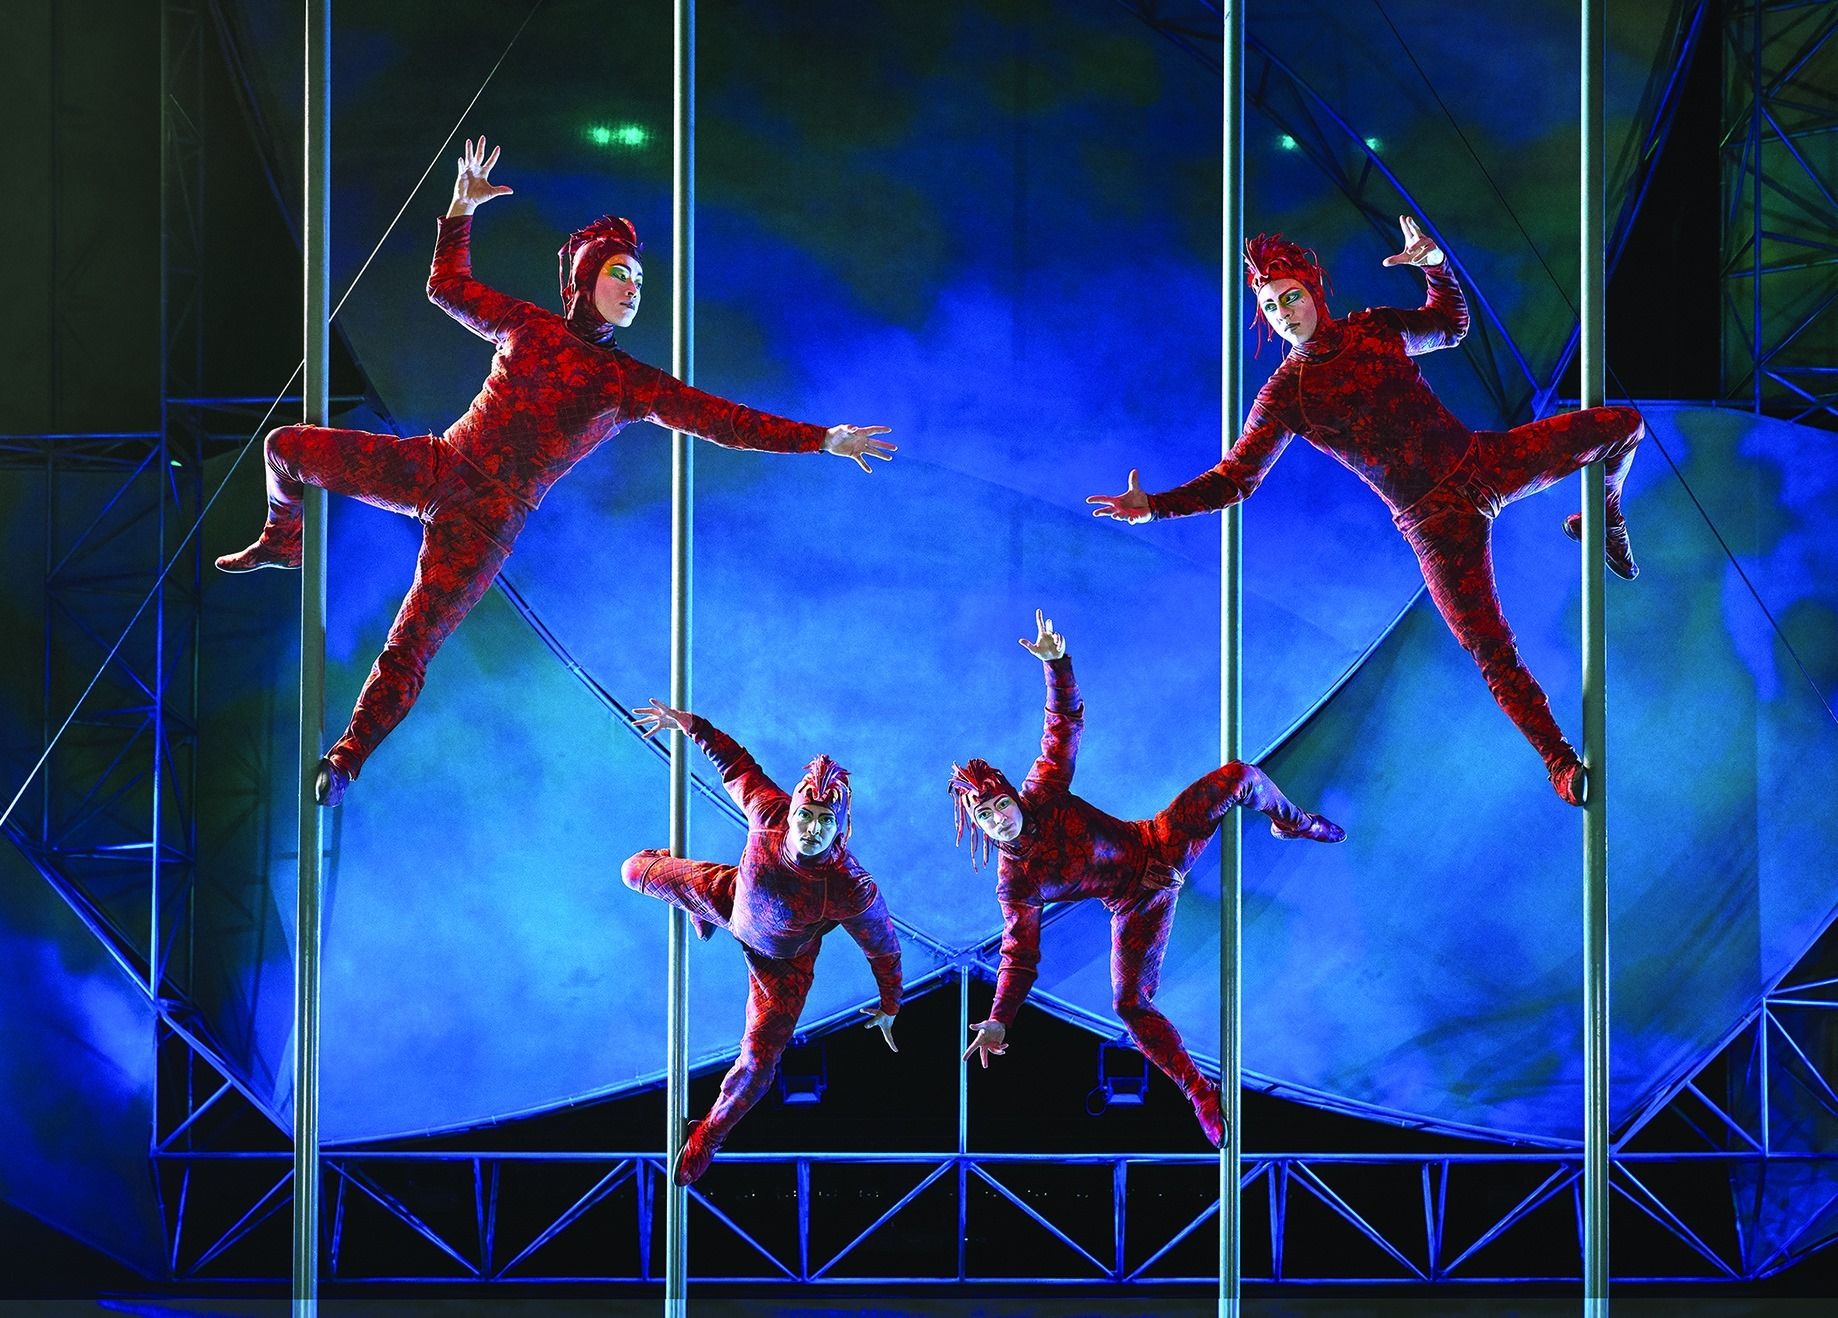 Circus performers at Mystere, a popular Las Vegas show